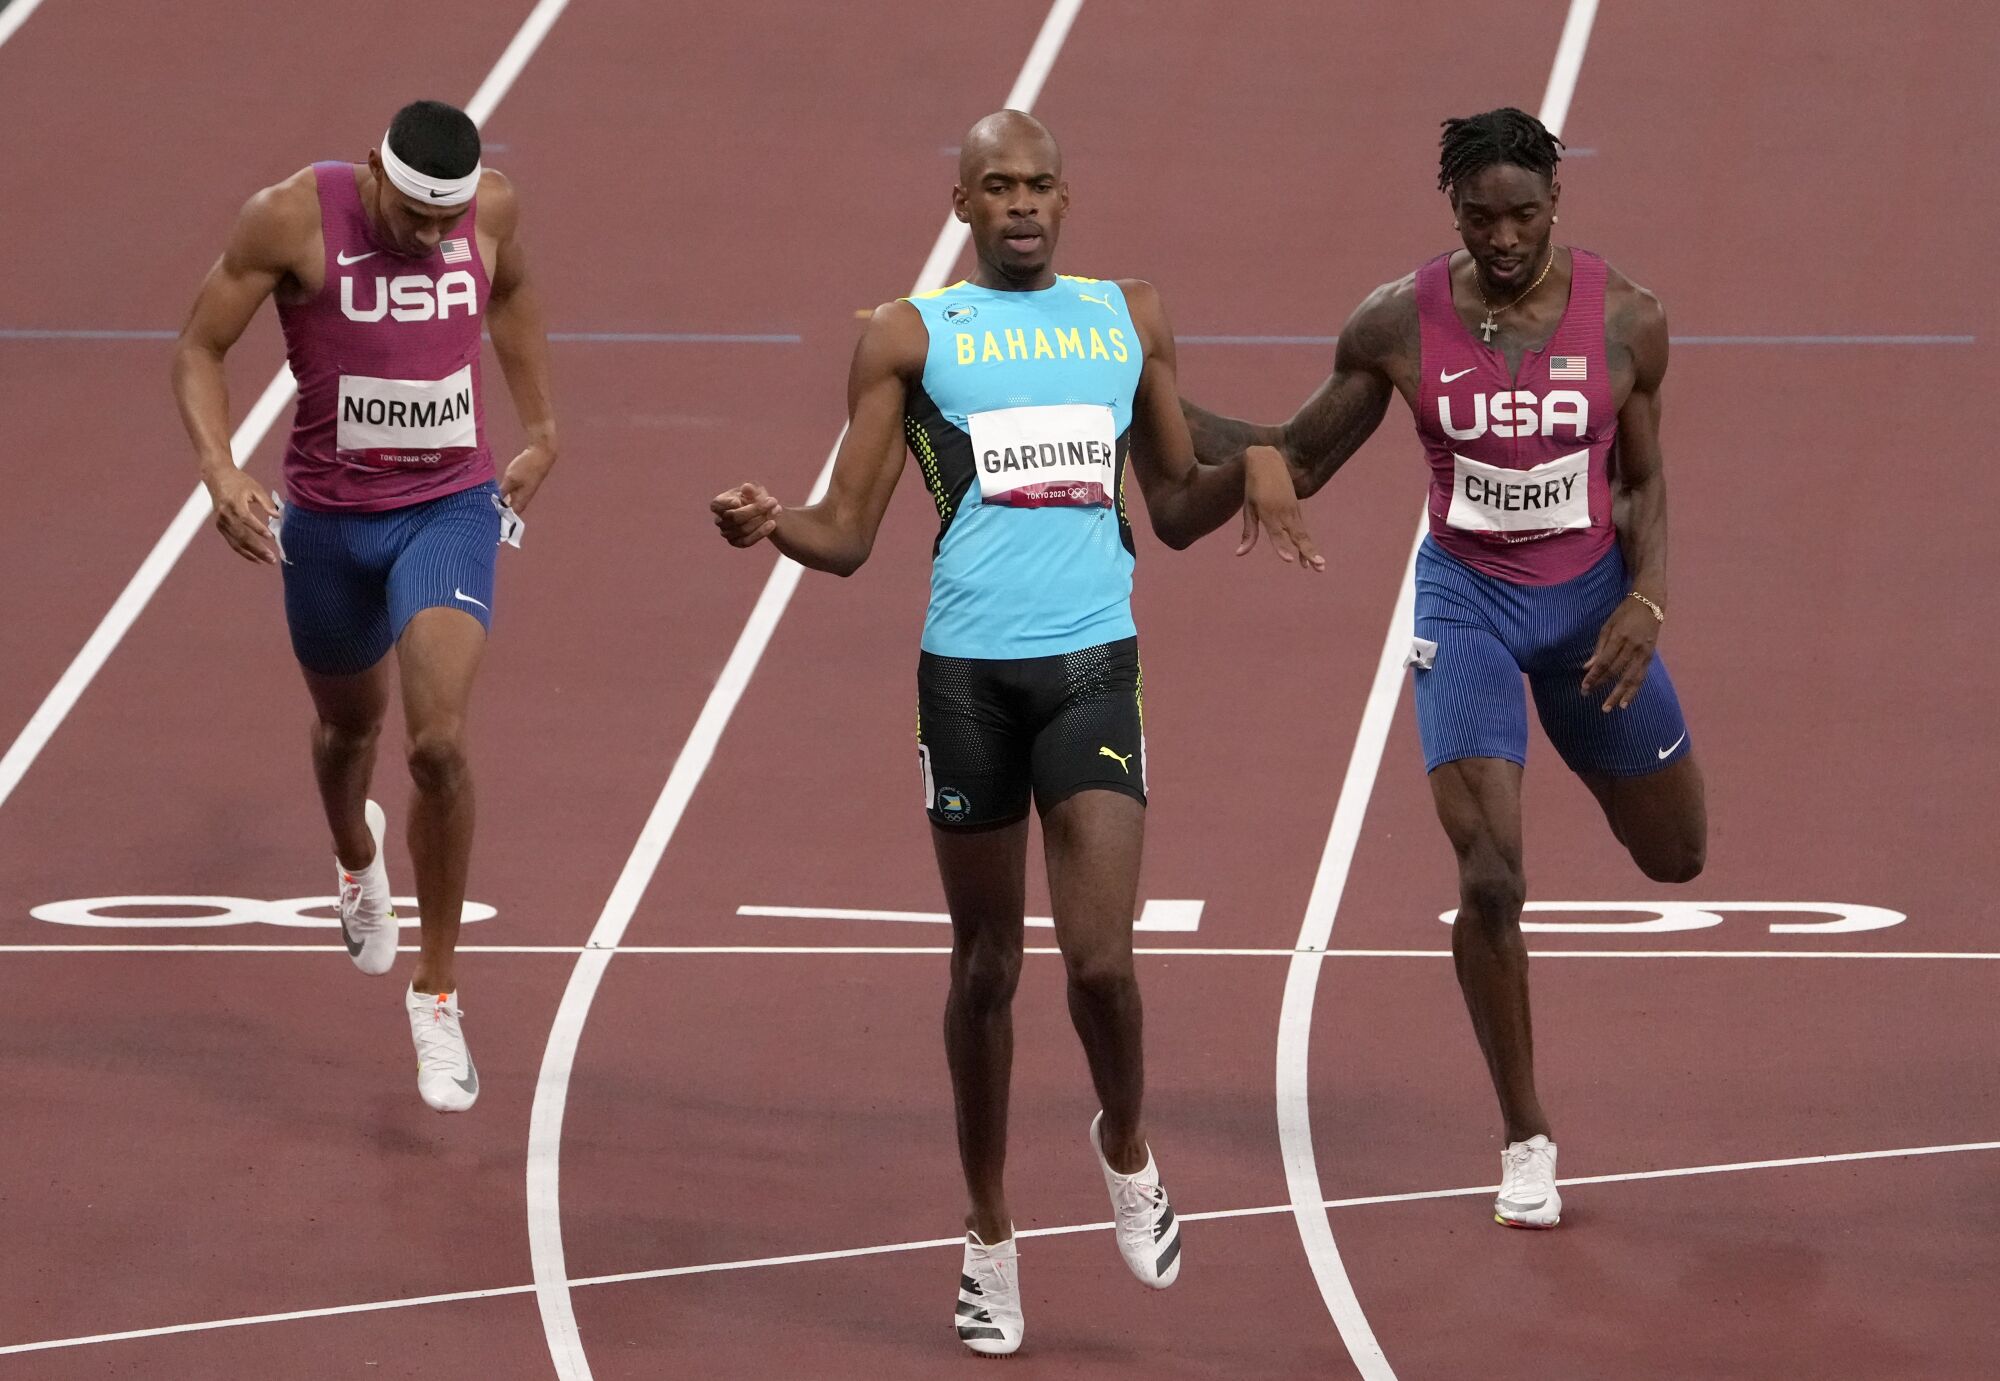 Steven Gardiner wins the gold medal in the 400 meters ahead of Americans Michael Norman and Michael Cherry at Tokyo Olympics.